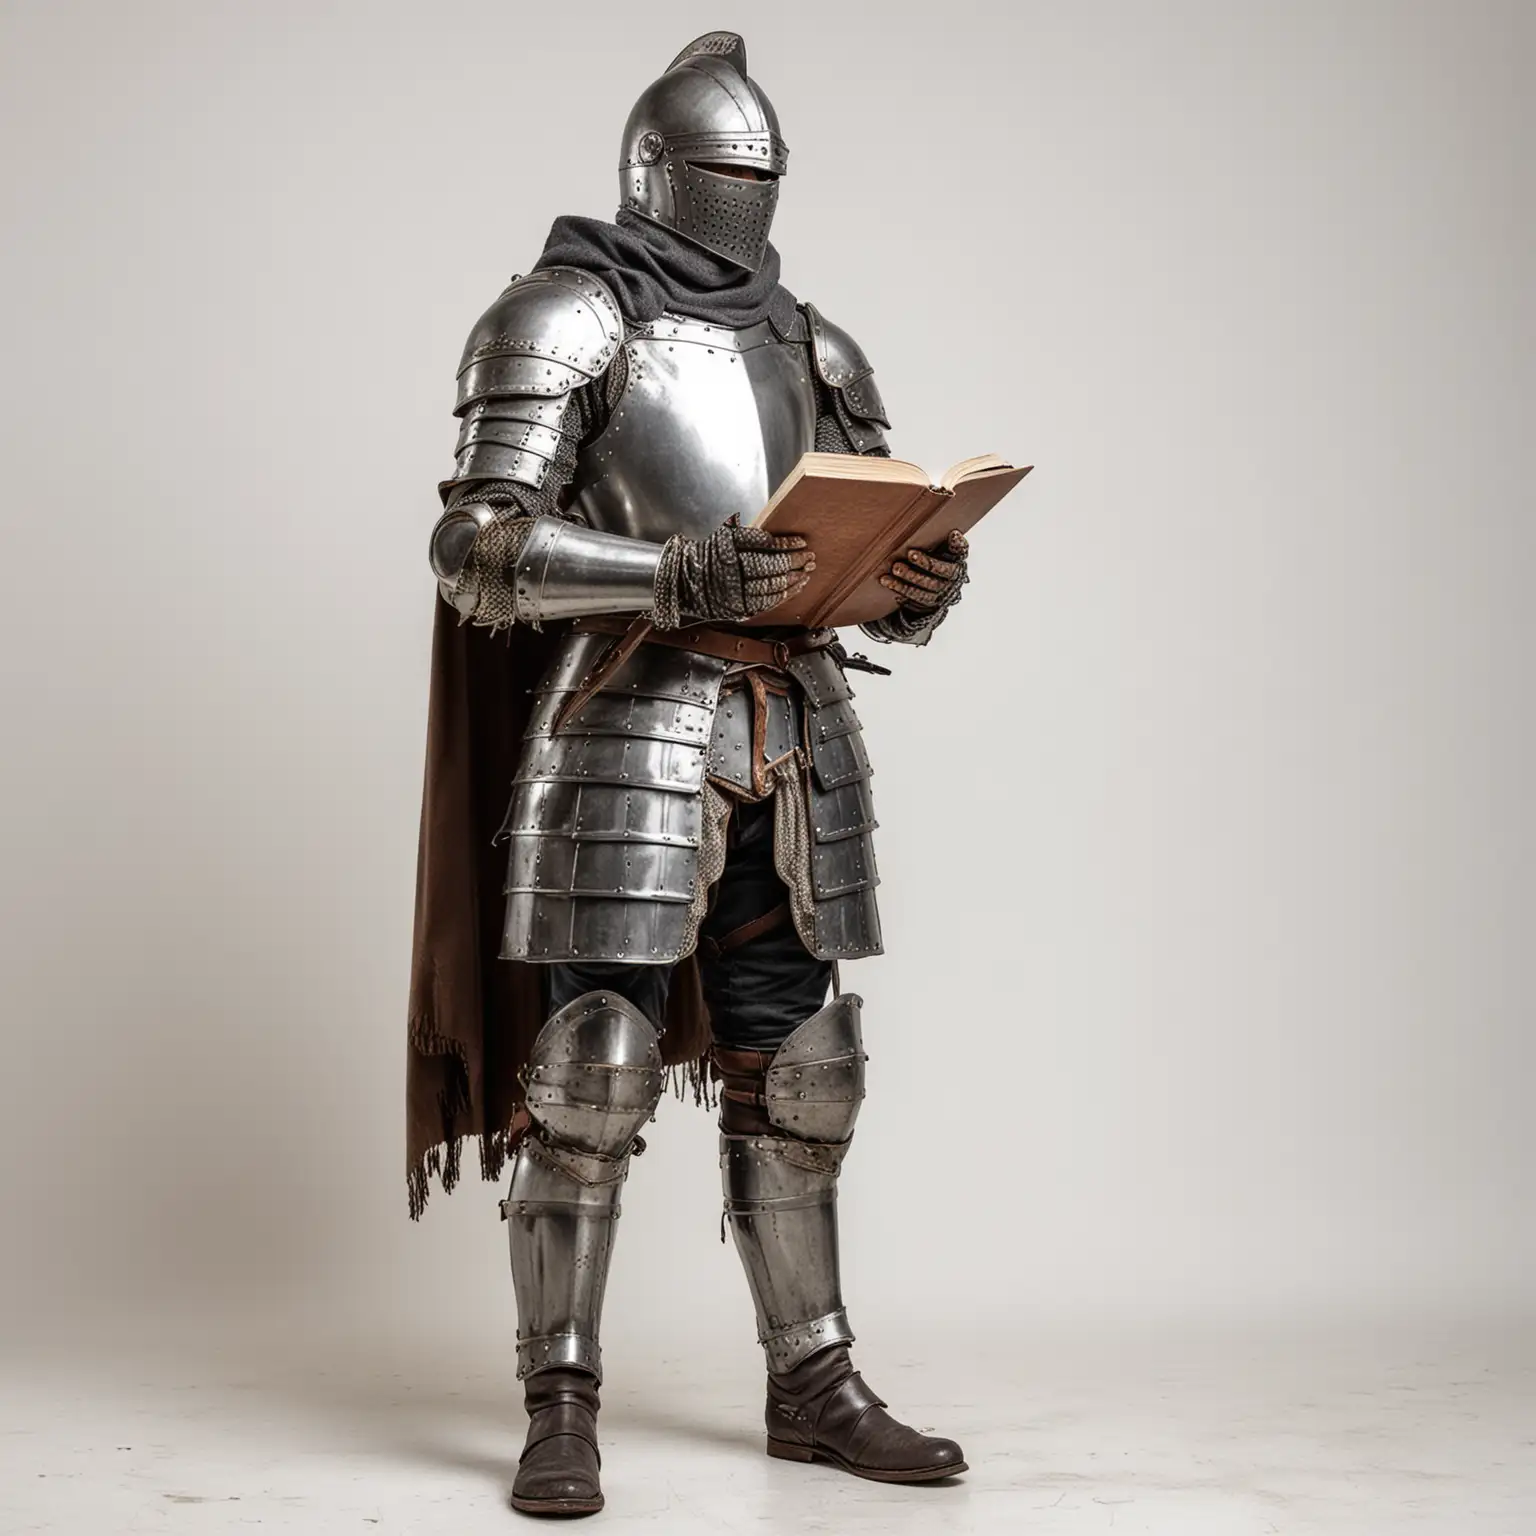 Standing full body view, knight in full armor reading book, boots, white background